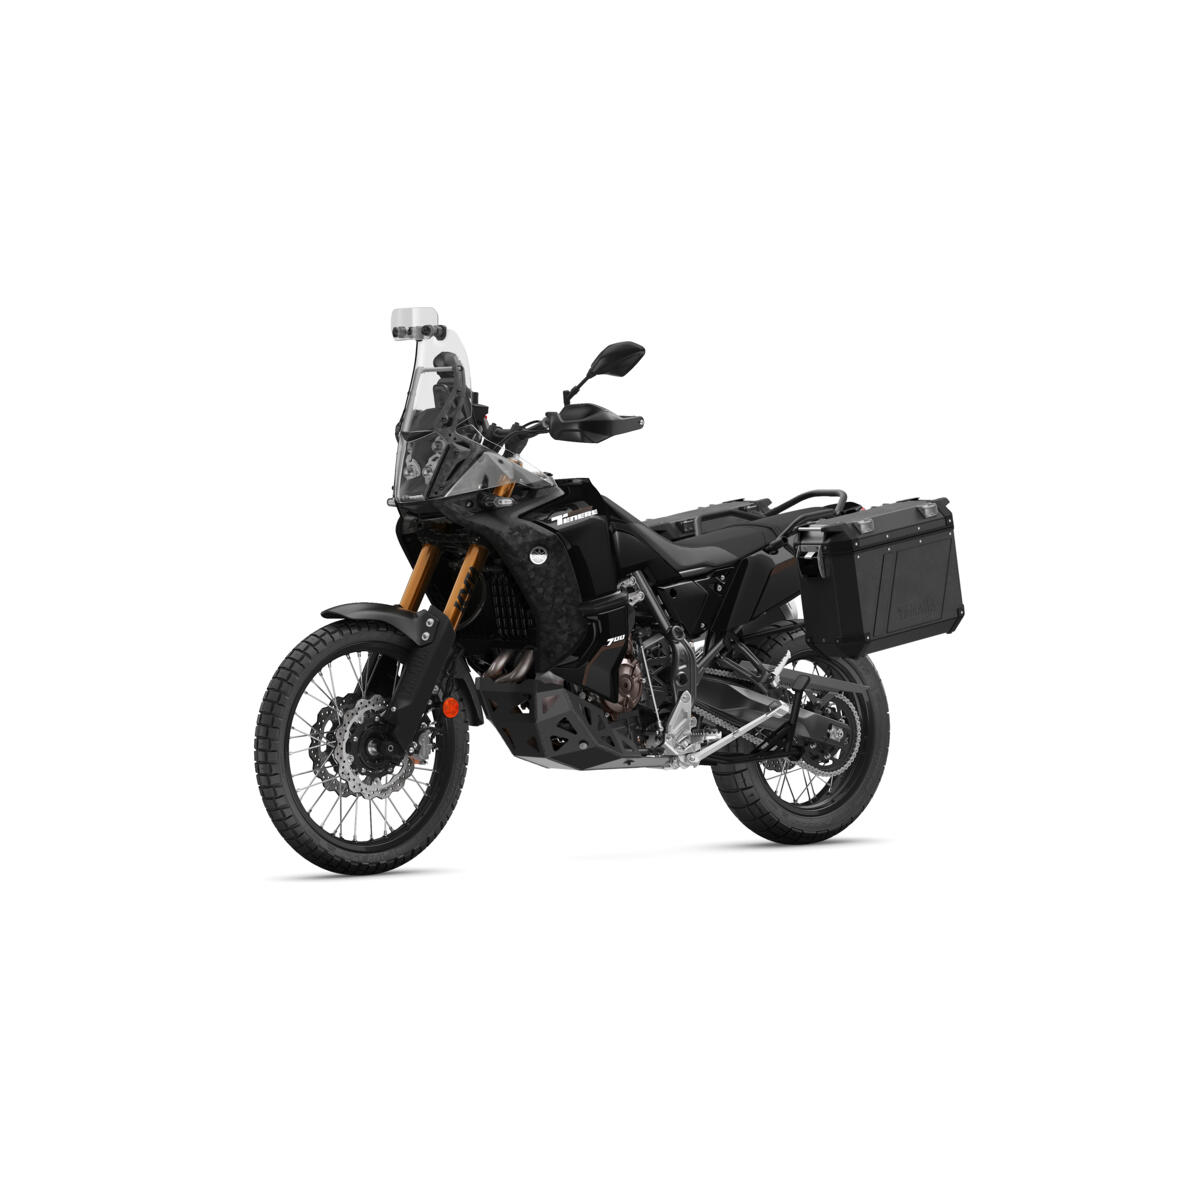 Ténéré 700 World Raid is built to fill your life with new horizons and that's why the Explorer Pack contains carefully selected accessories to support this journey of discovery.